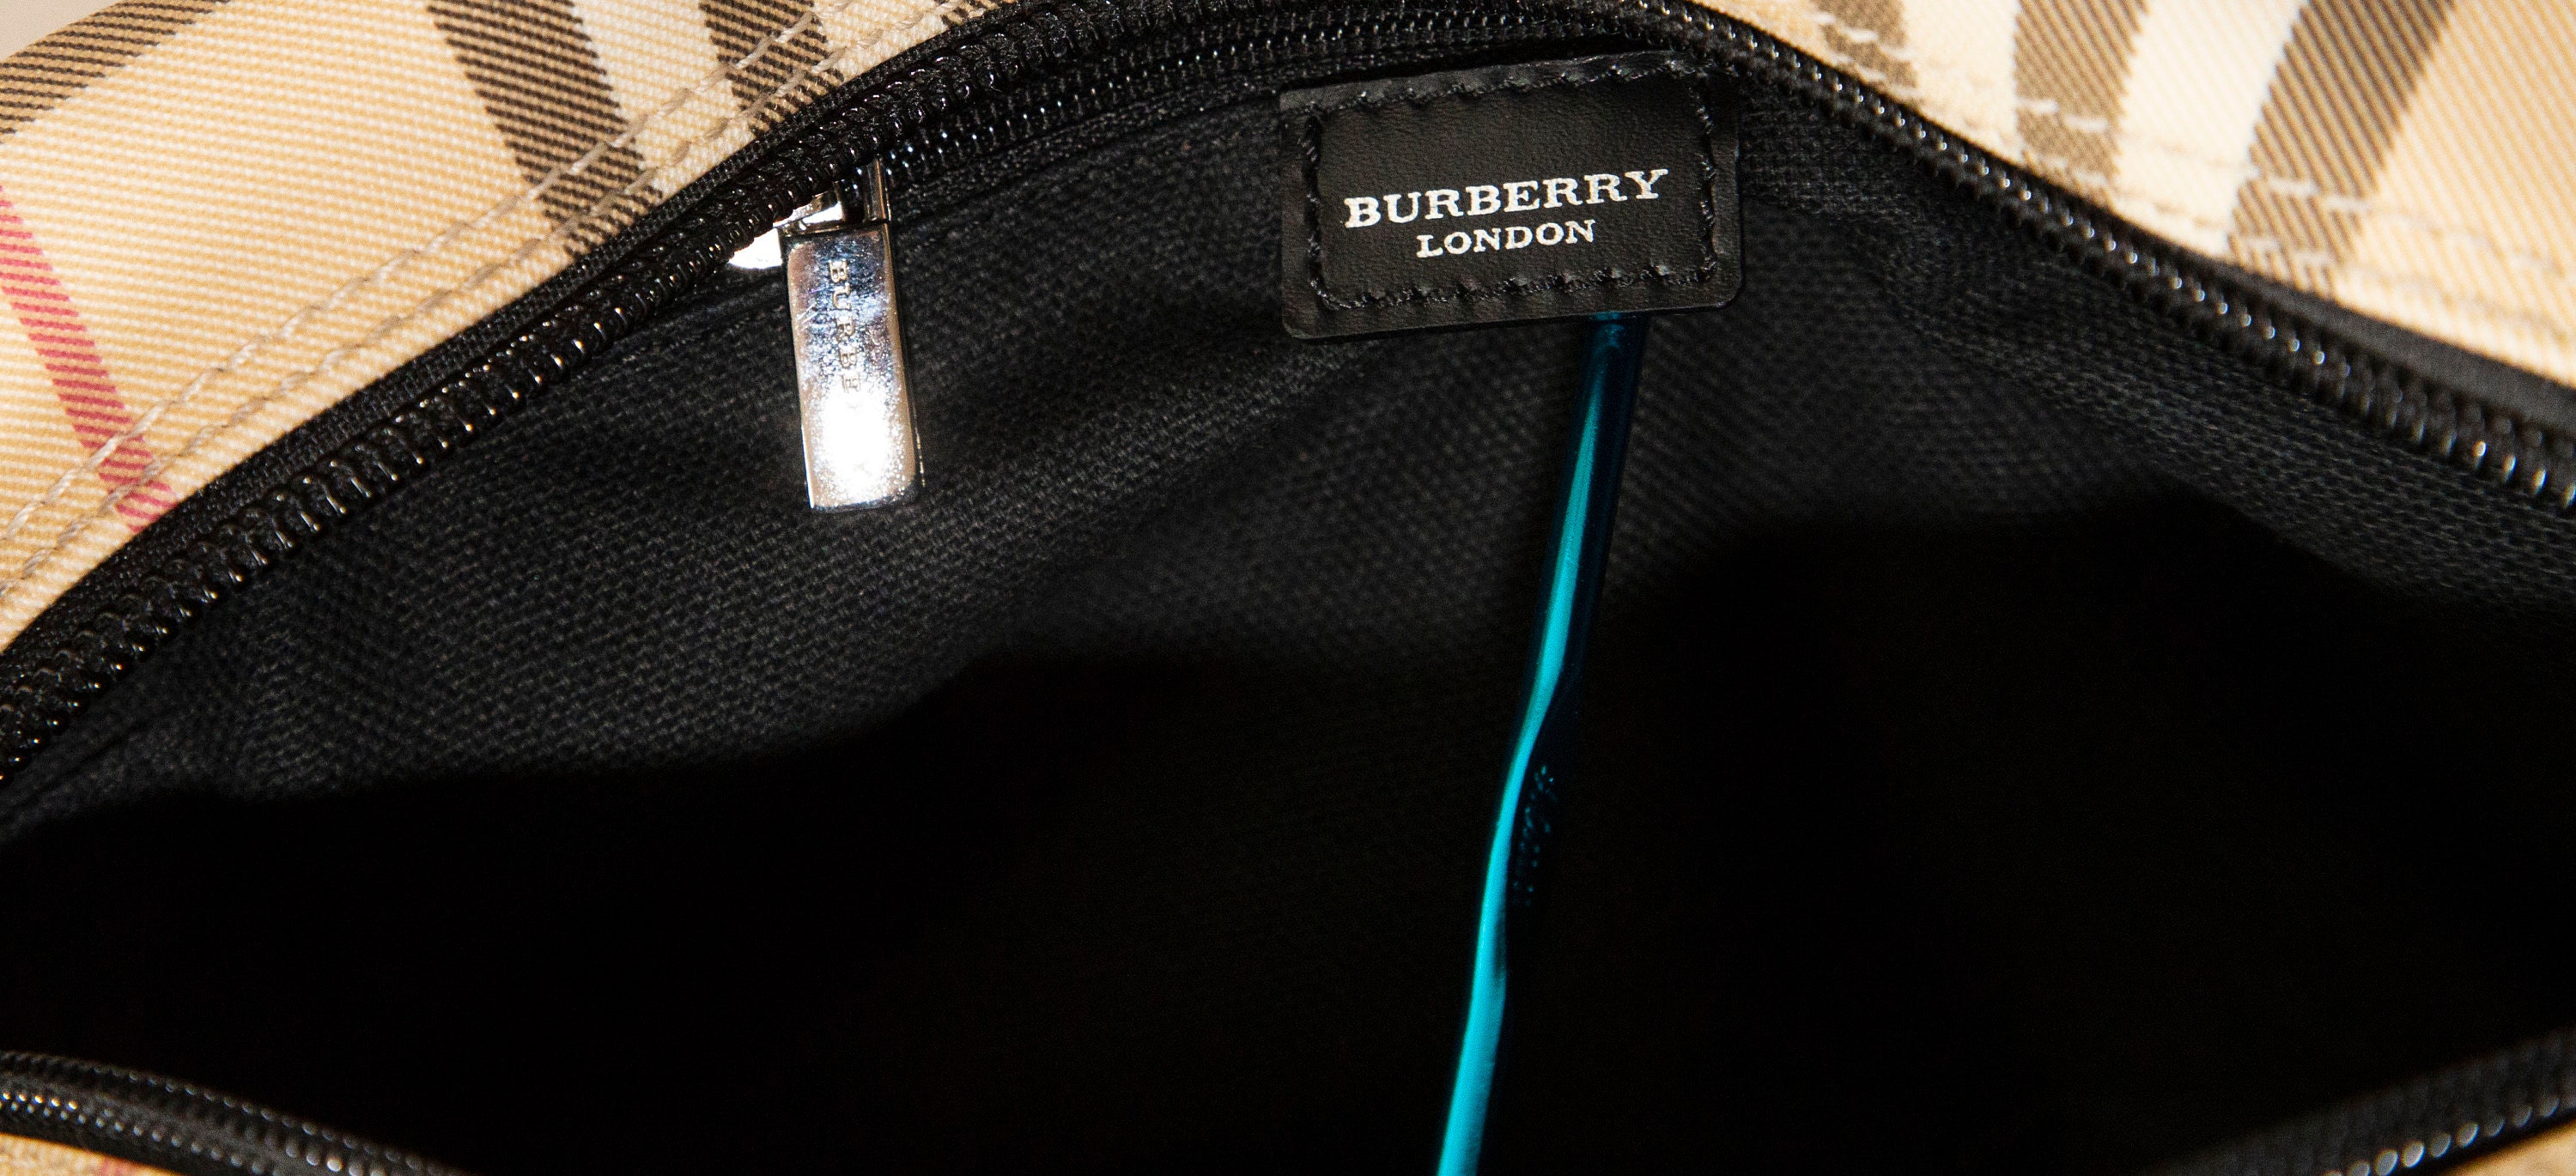 Burberry Camera Bag in Really Good Condition 